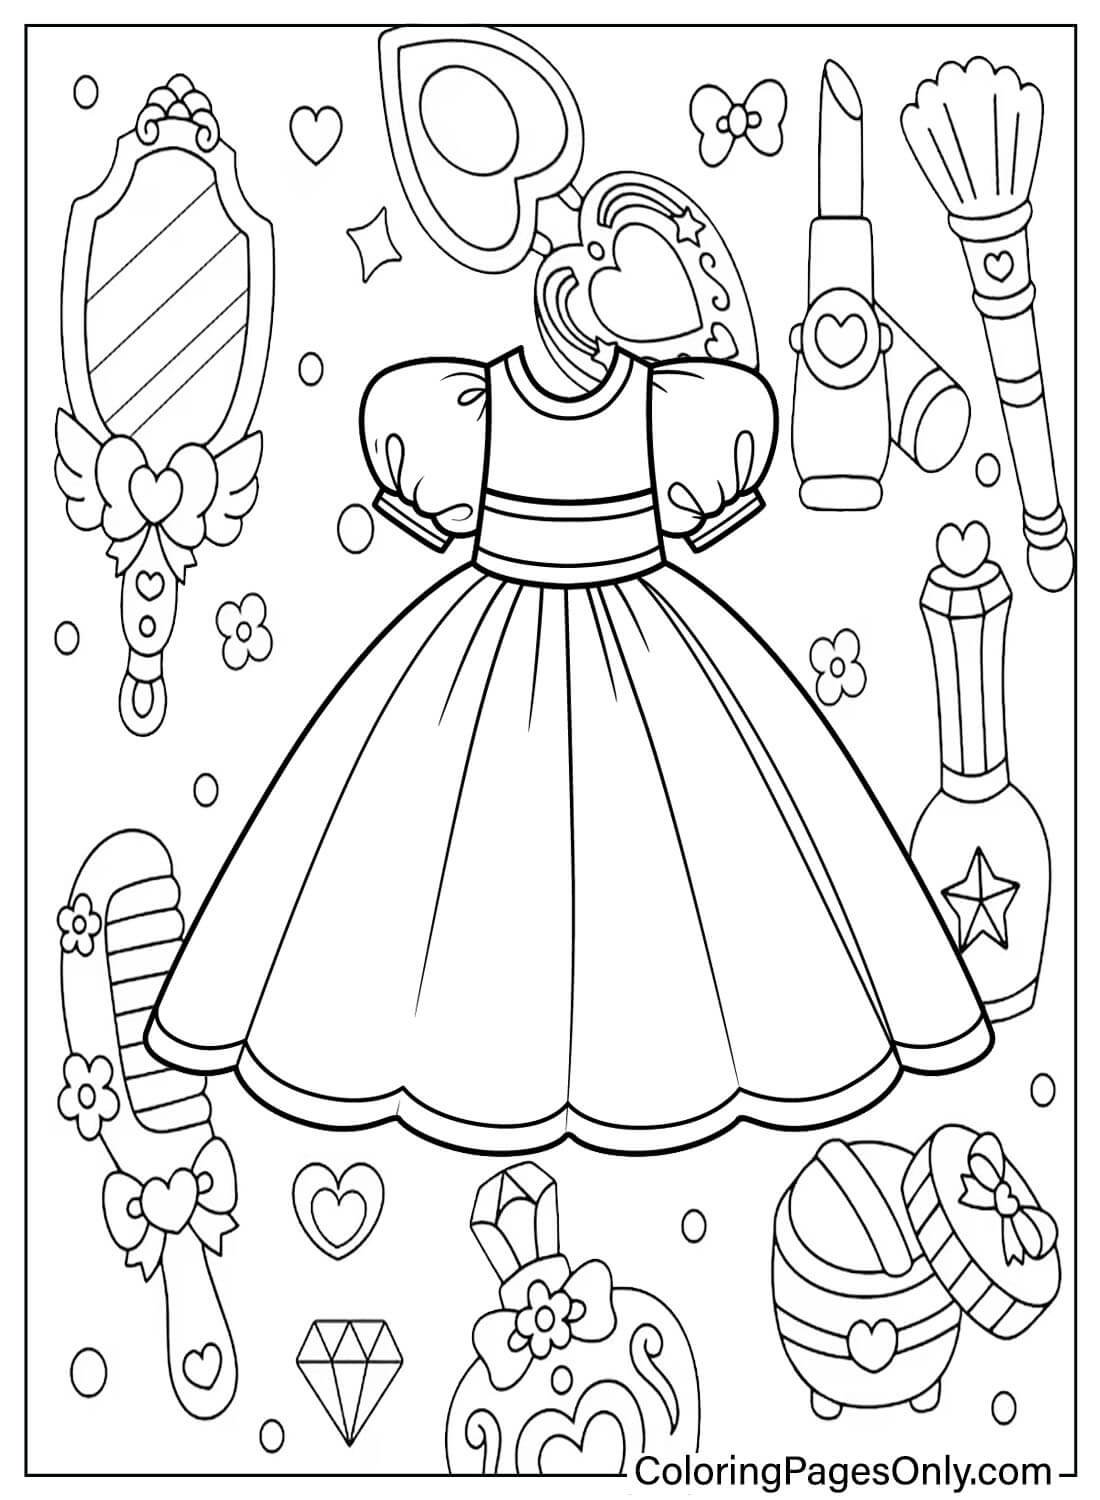 Baby Dress Coloring Book from Baby Dress